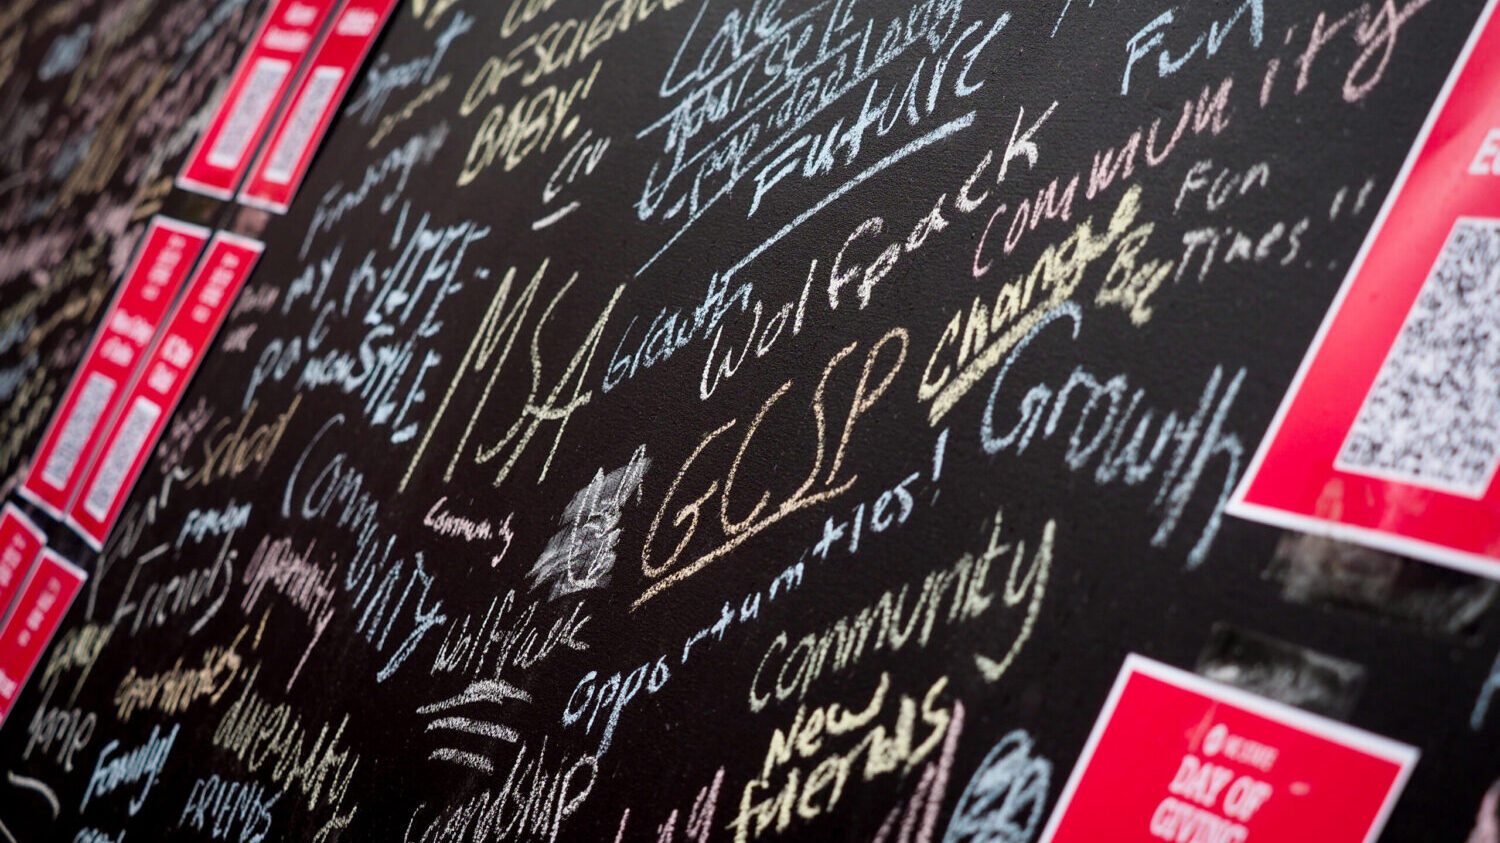 a chalkboard filled with positive phrases from students sharing what NC State means to them